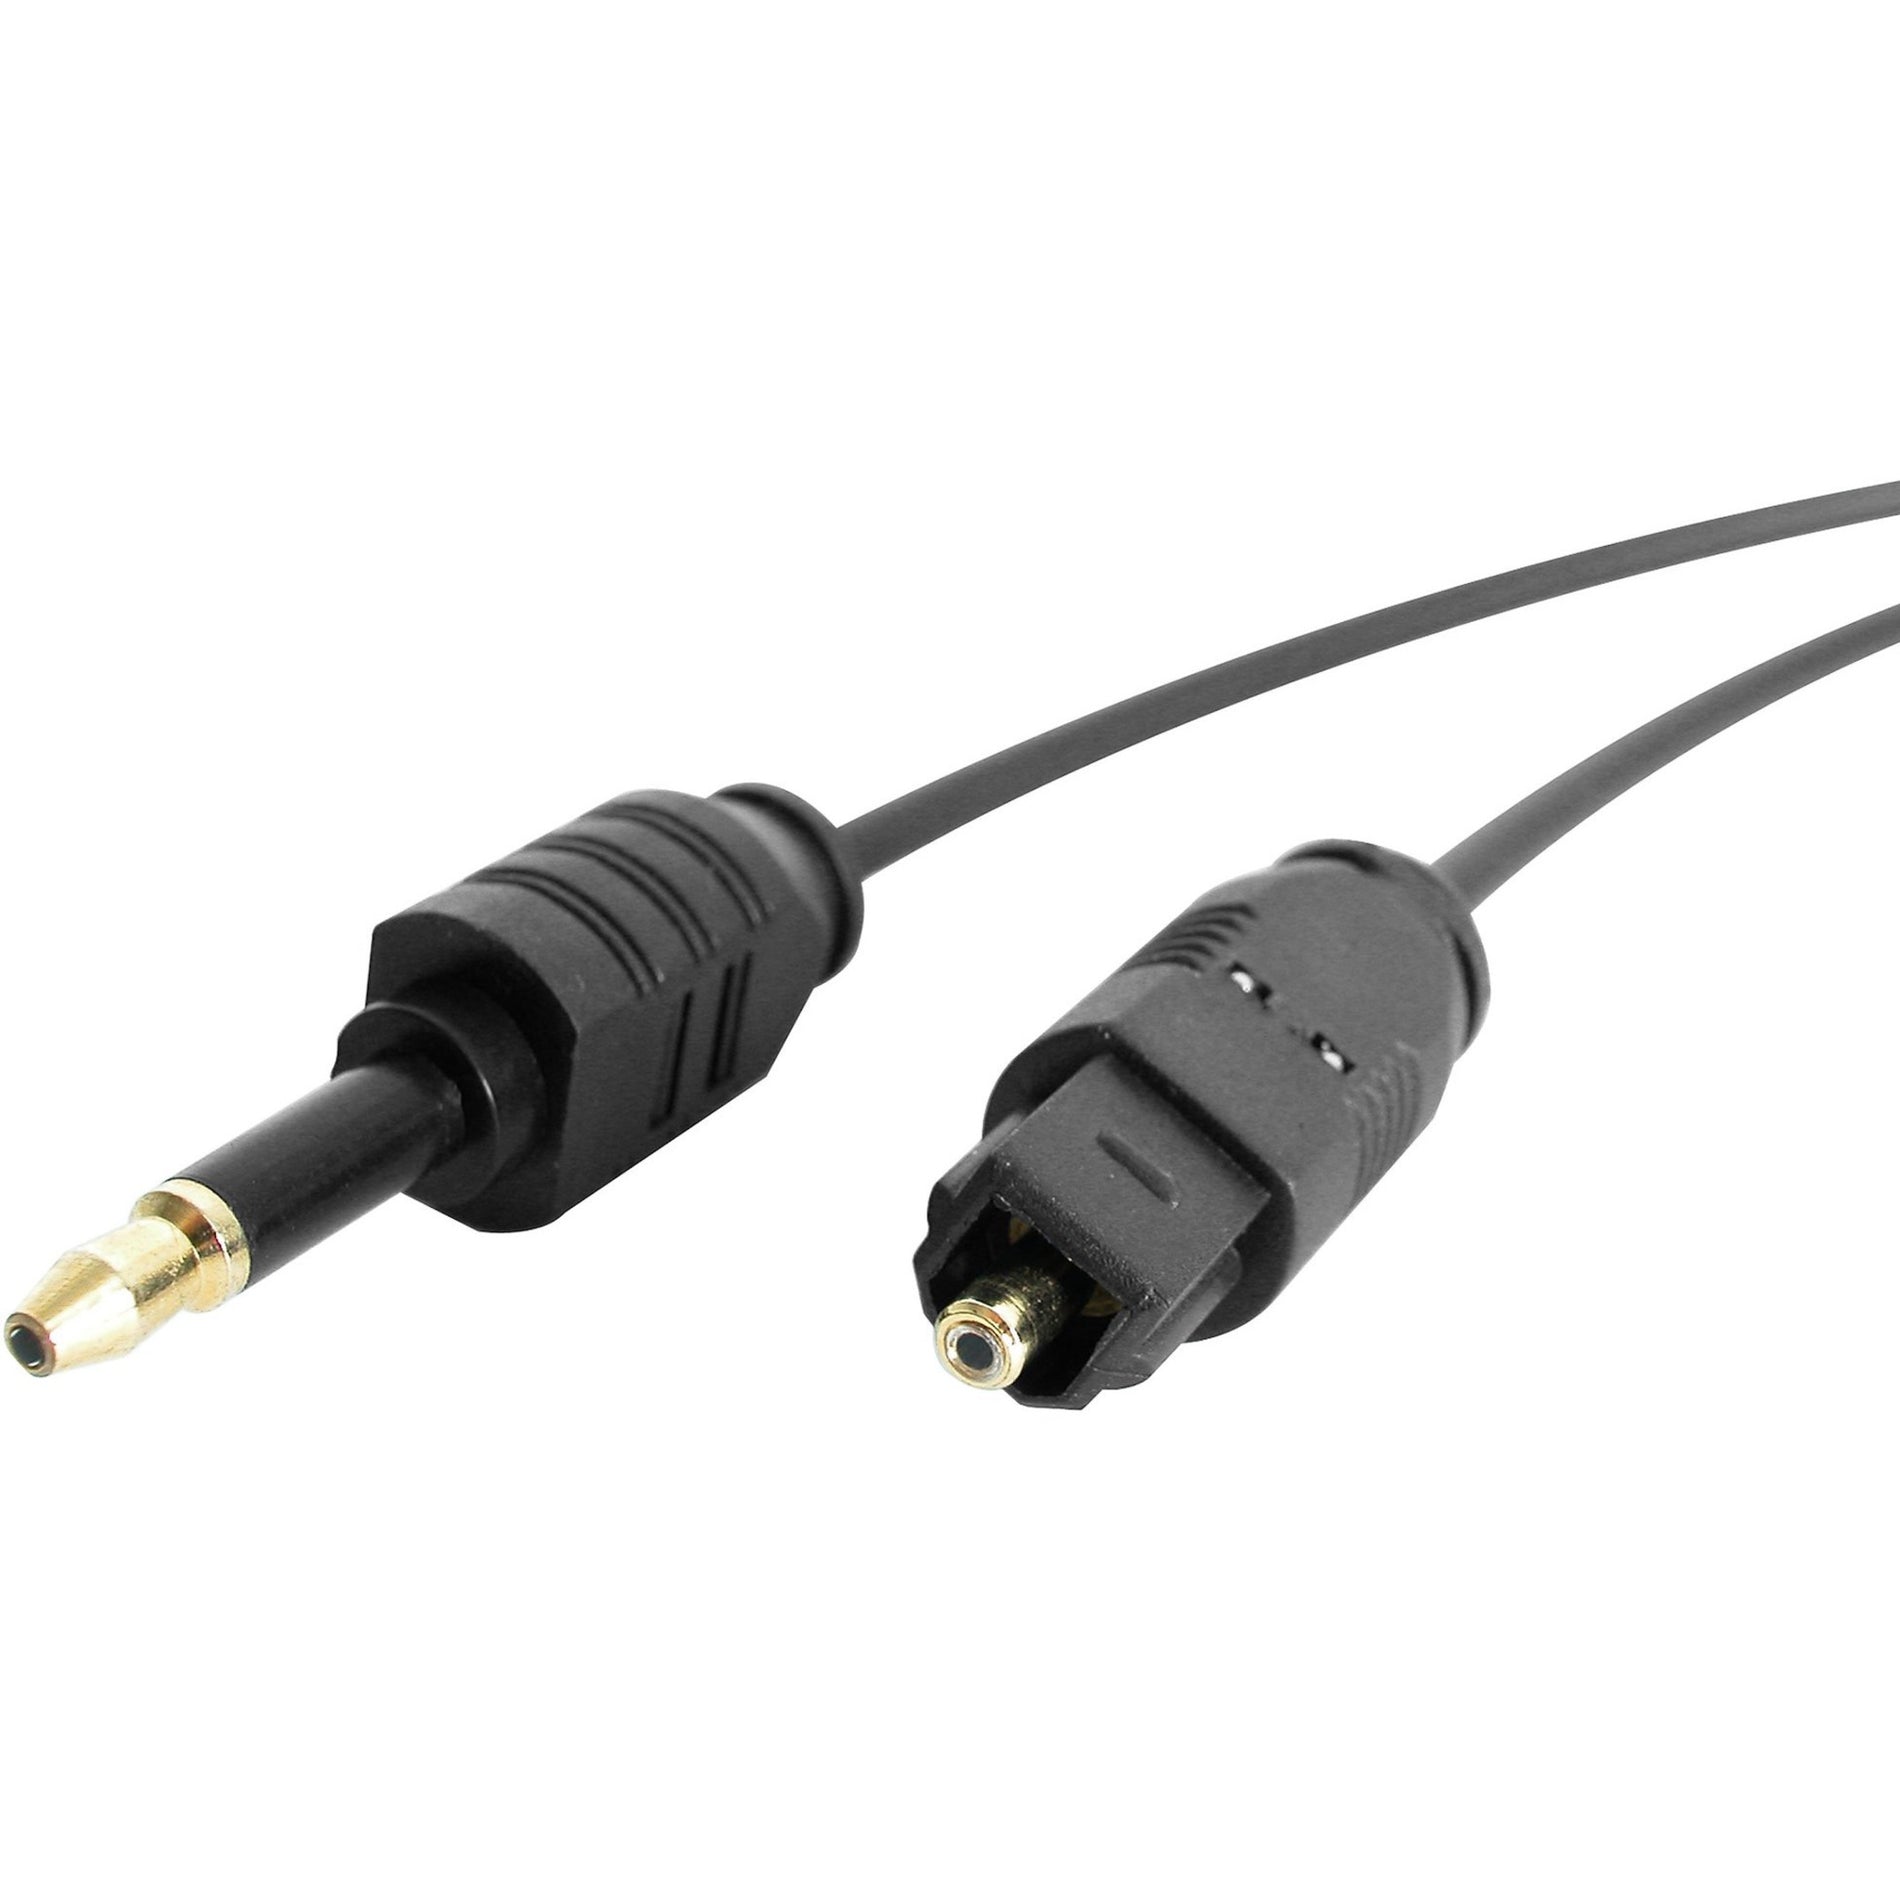 StarTech.com THINTOSMIN6 6ft Toslink to Mini Digital Optical SPDIF Audio Cable, Flexible, Damage Resistant, Ultra-thin